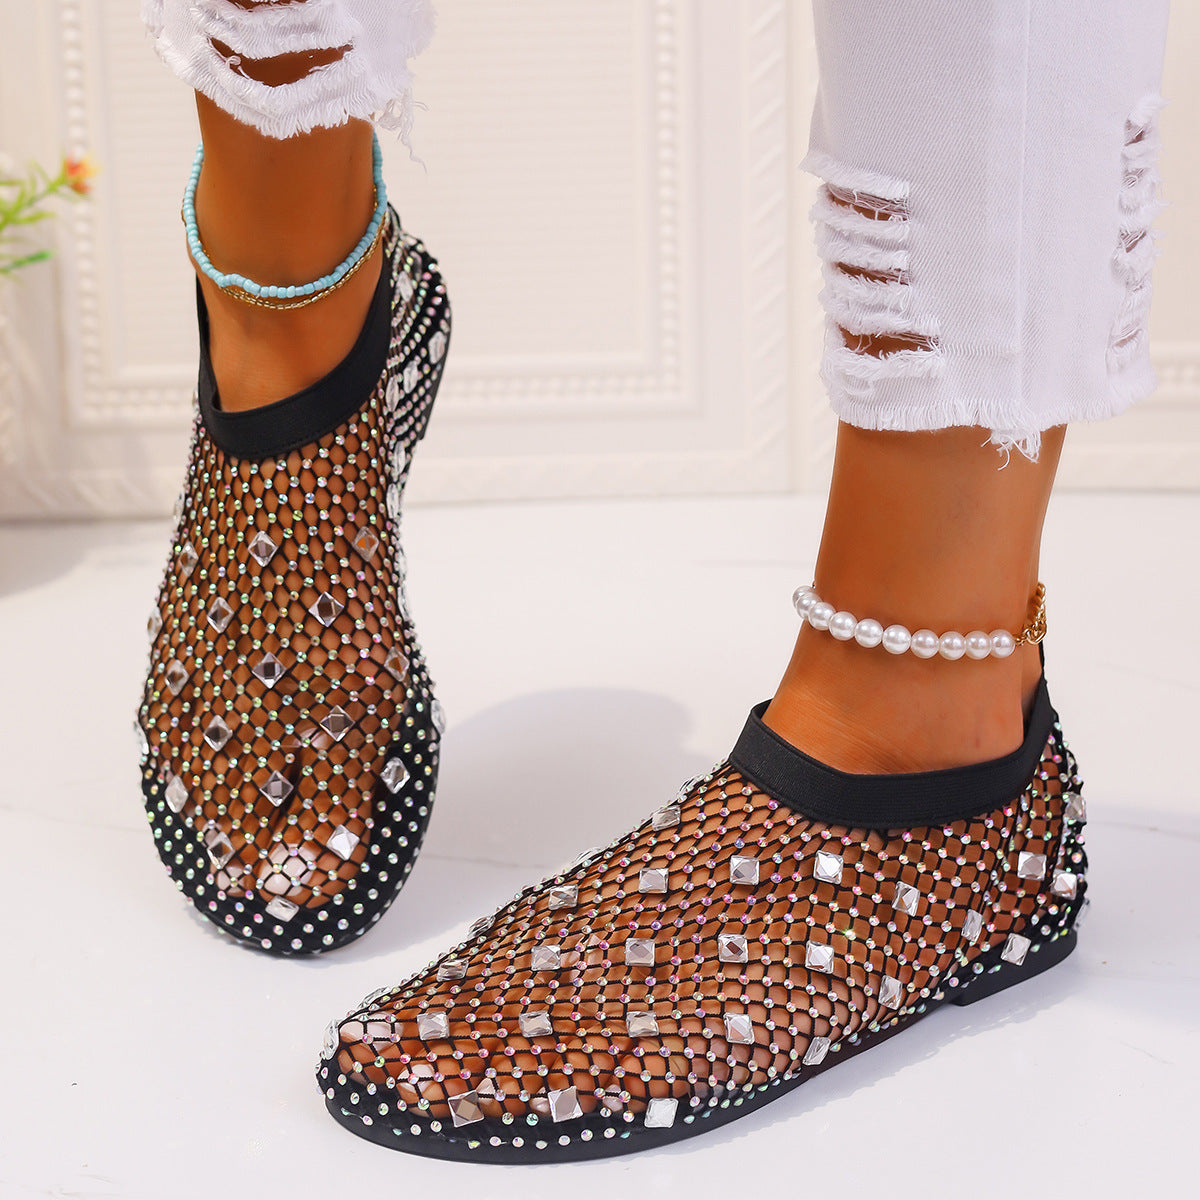 Fashion Mesh Flat Sandals With Colorful Rhinestone Design Summer New Round Toe Beach Shoes For Women